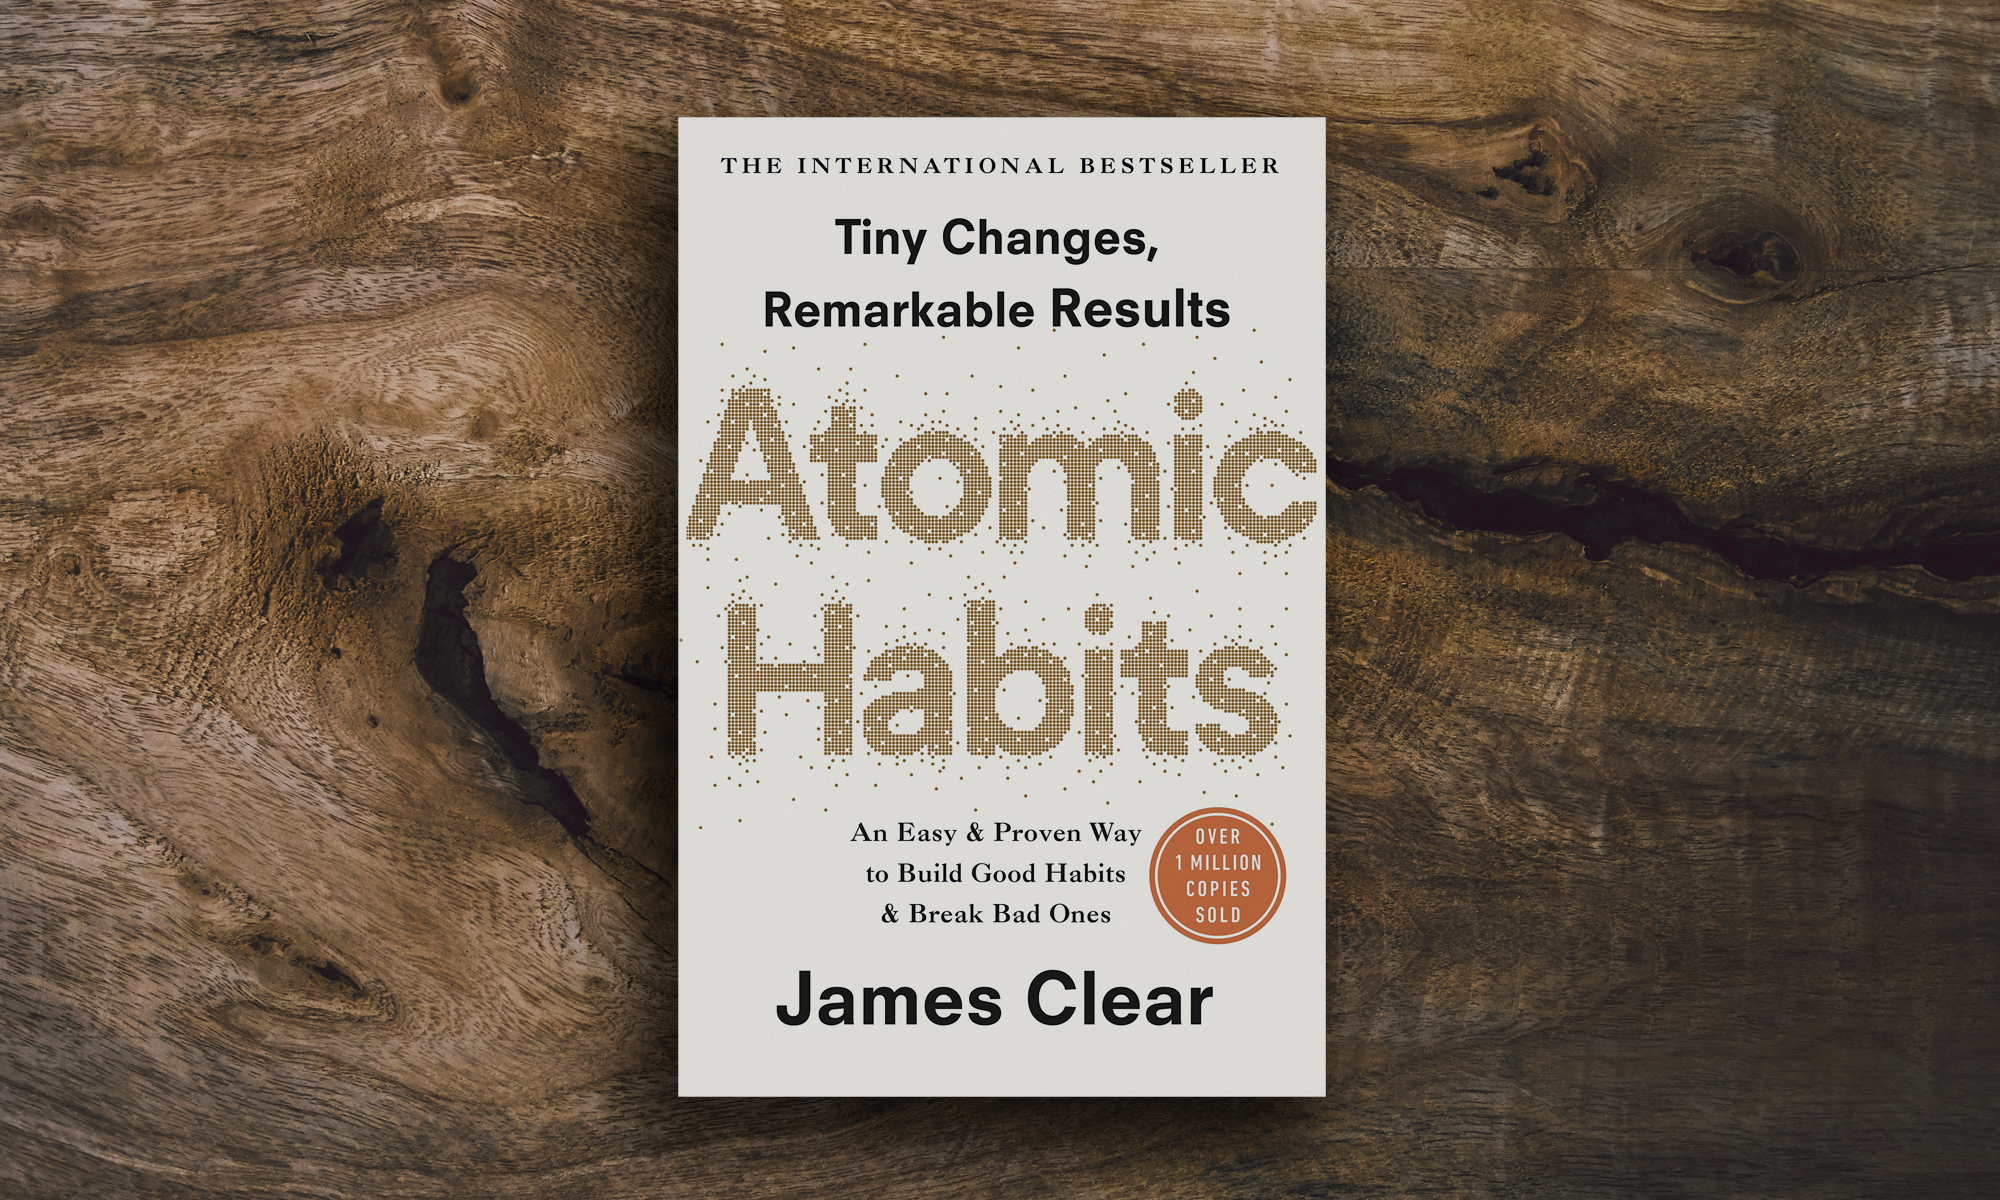 Cover of the book "Atomic Habits" by James Clear